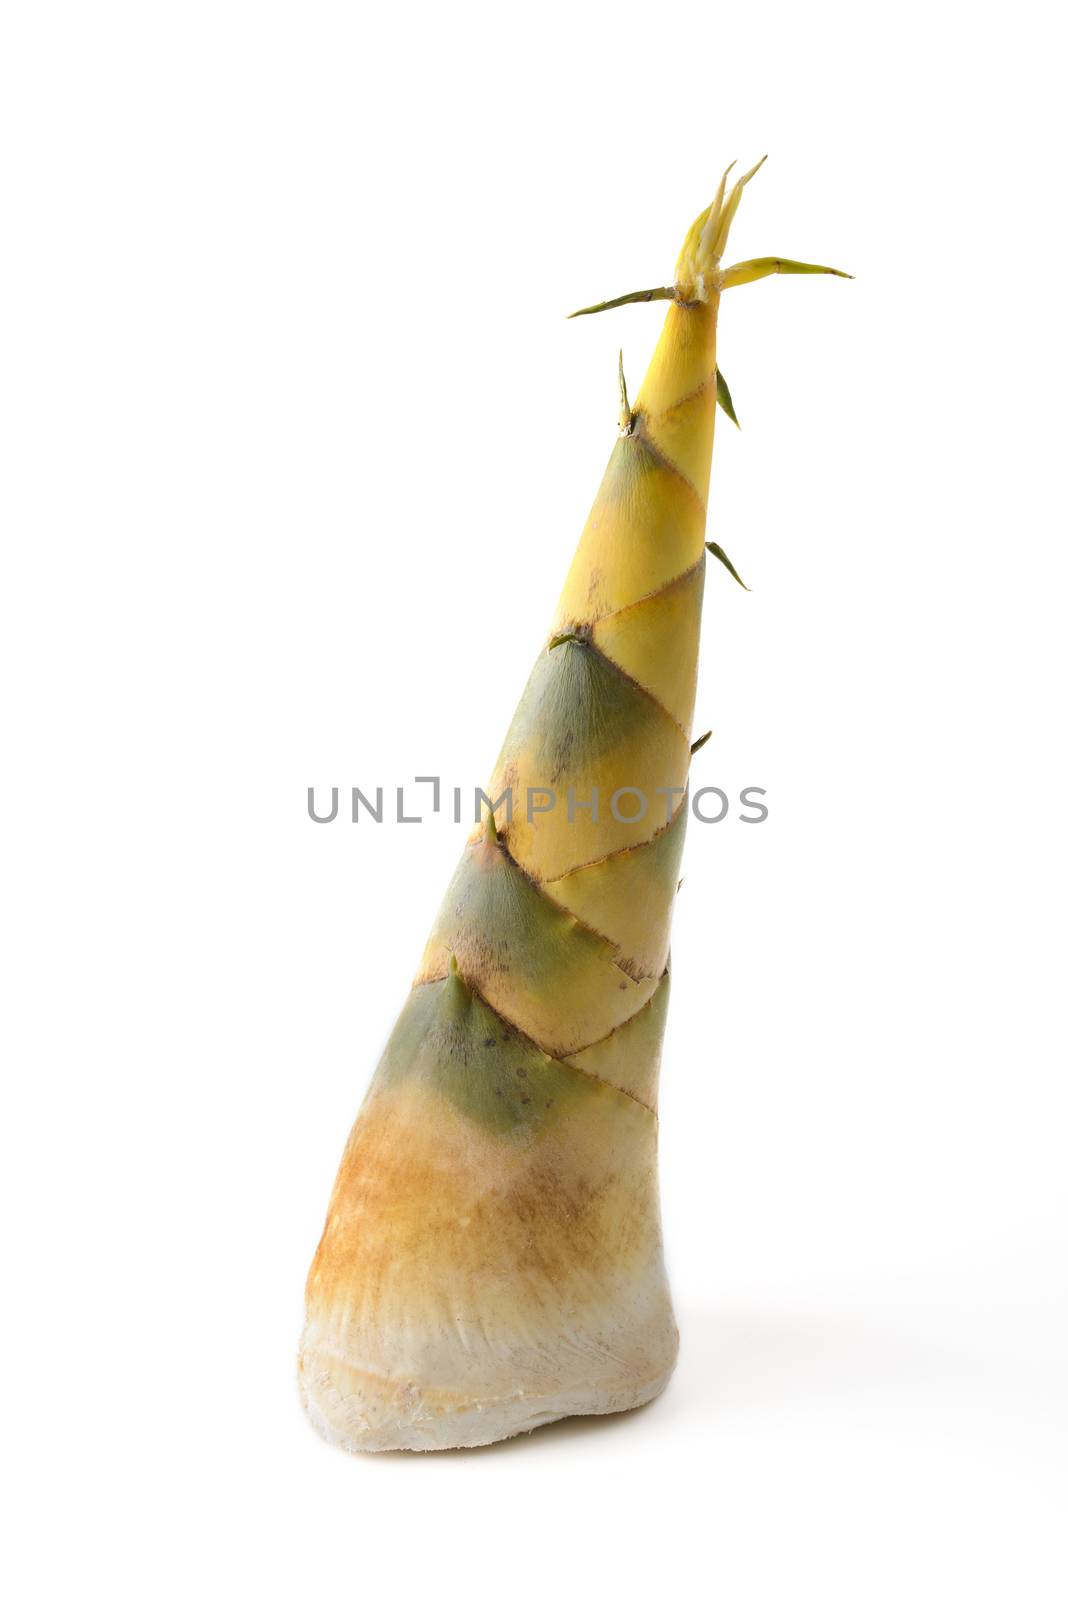 bamboo shoots by antpkr